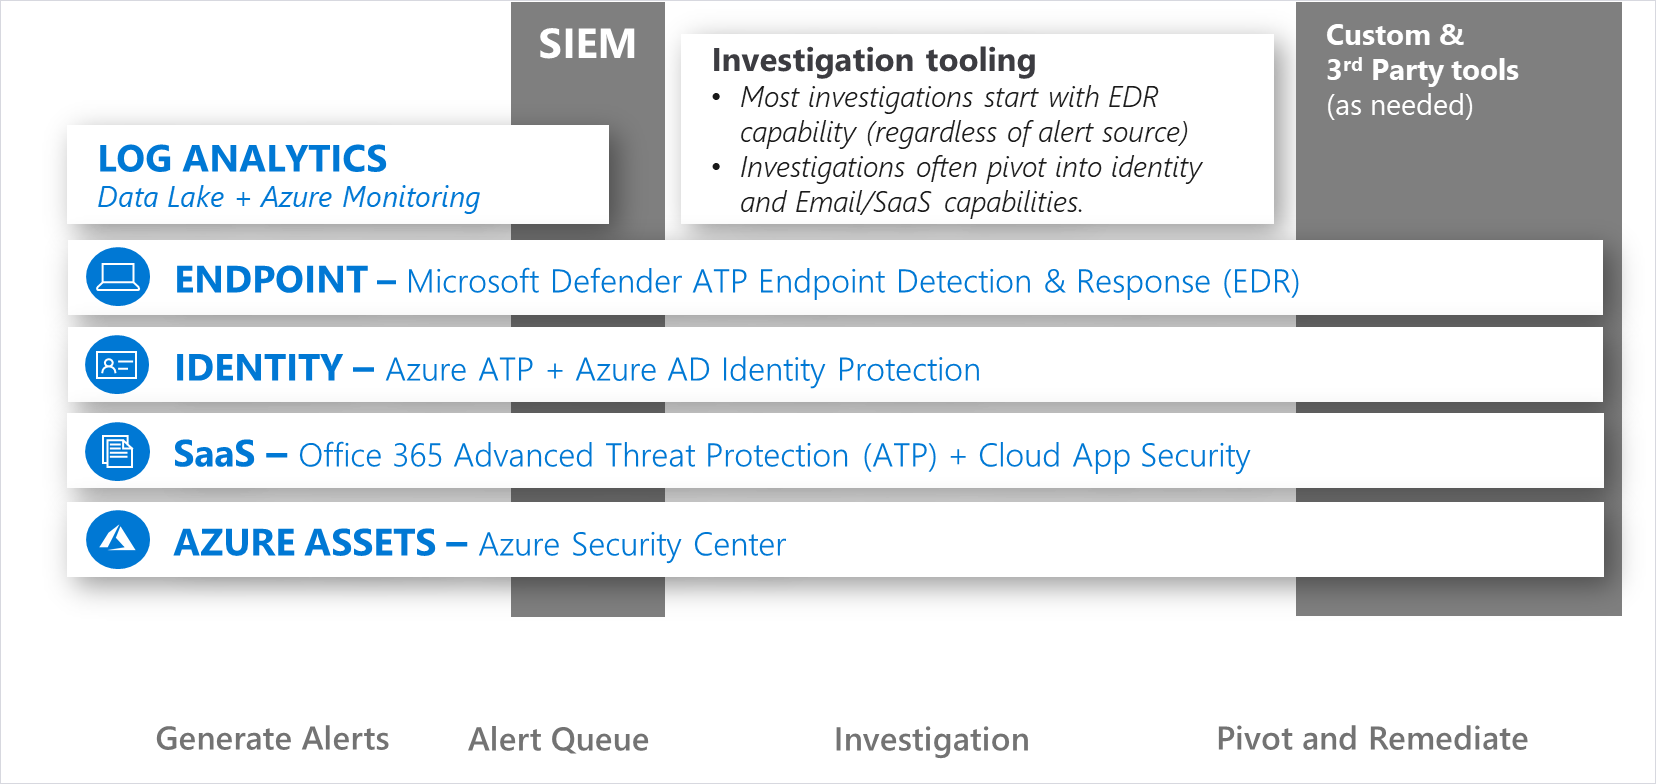 Infographic showing Investigation tooling in SIEM: Log analytics, Endpoint, Identity, Saas, and Azure Assets.